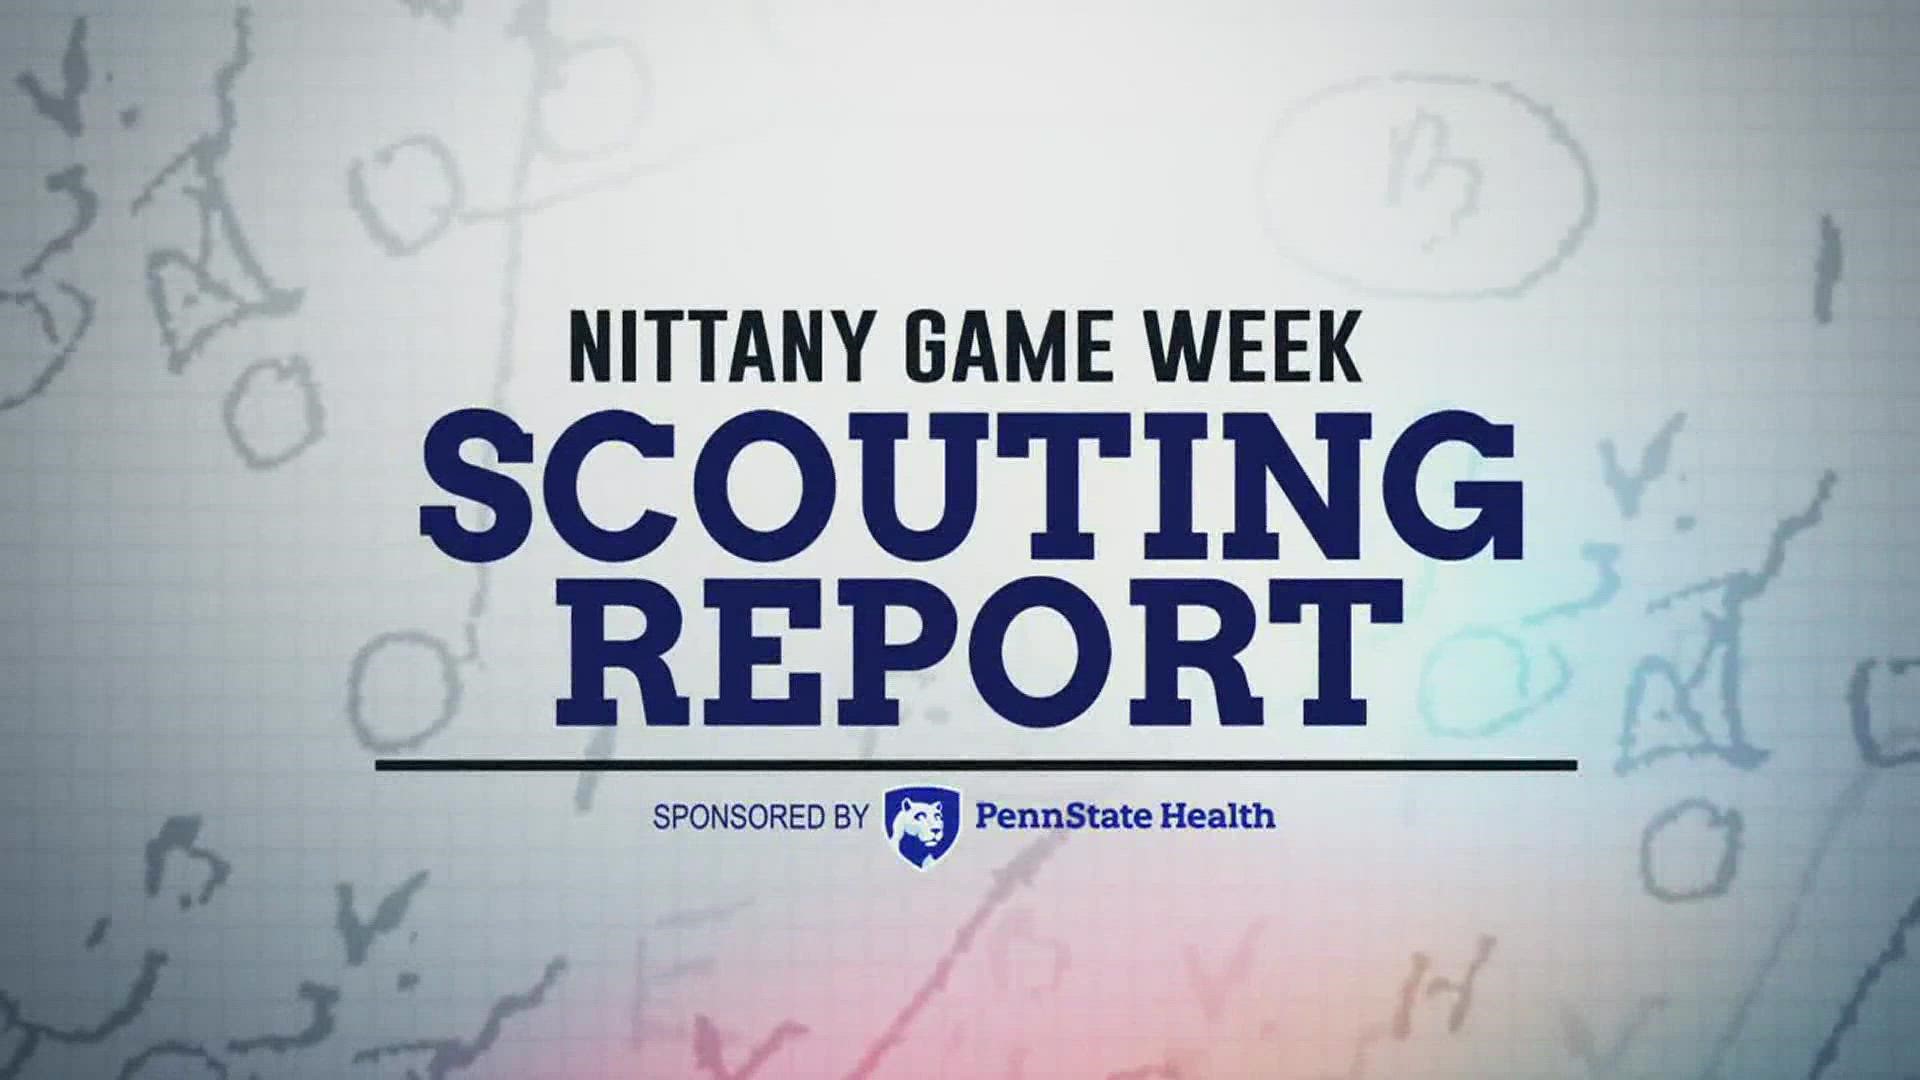 The No. 22/23 Nittany Lions are trying to snap a three-game losing streak and hope to avenge last year's 35-19 loss to the Terps in 2020.